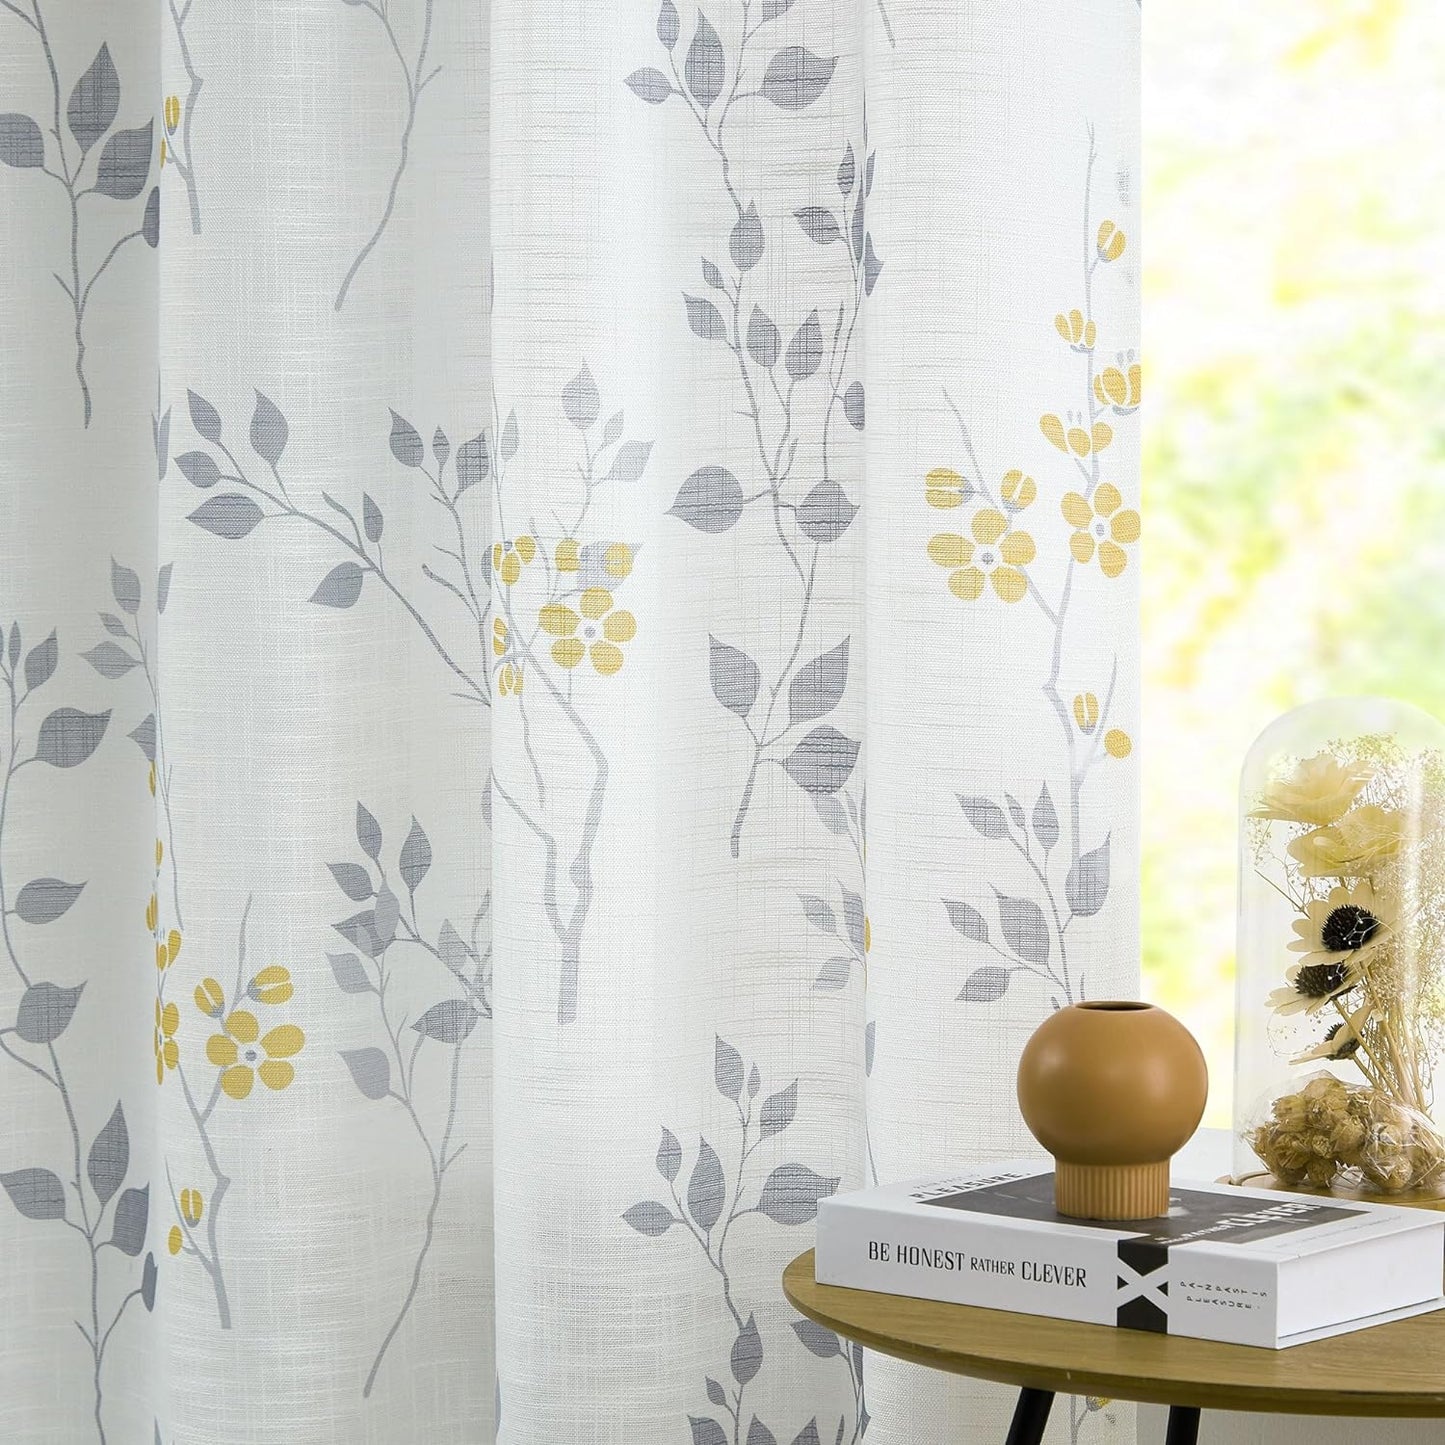 Beauoop Floral Semi Sheer Curtains 84 Inch Long for Living Room Bedroom Farmhouse Botanical Leaf Printed Rustic Linen Texture Panel Drapes Rod Pocket Window Treatment,2 Panels,50 Wide,Yellow/Gray  Beauoop   